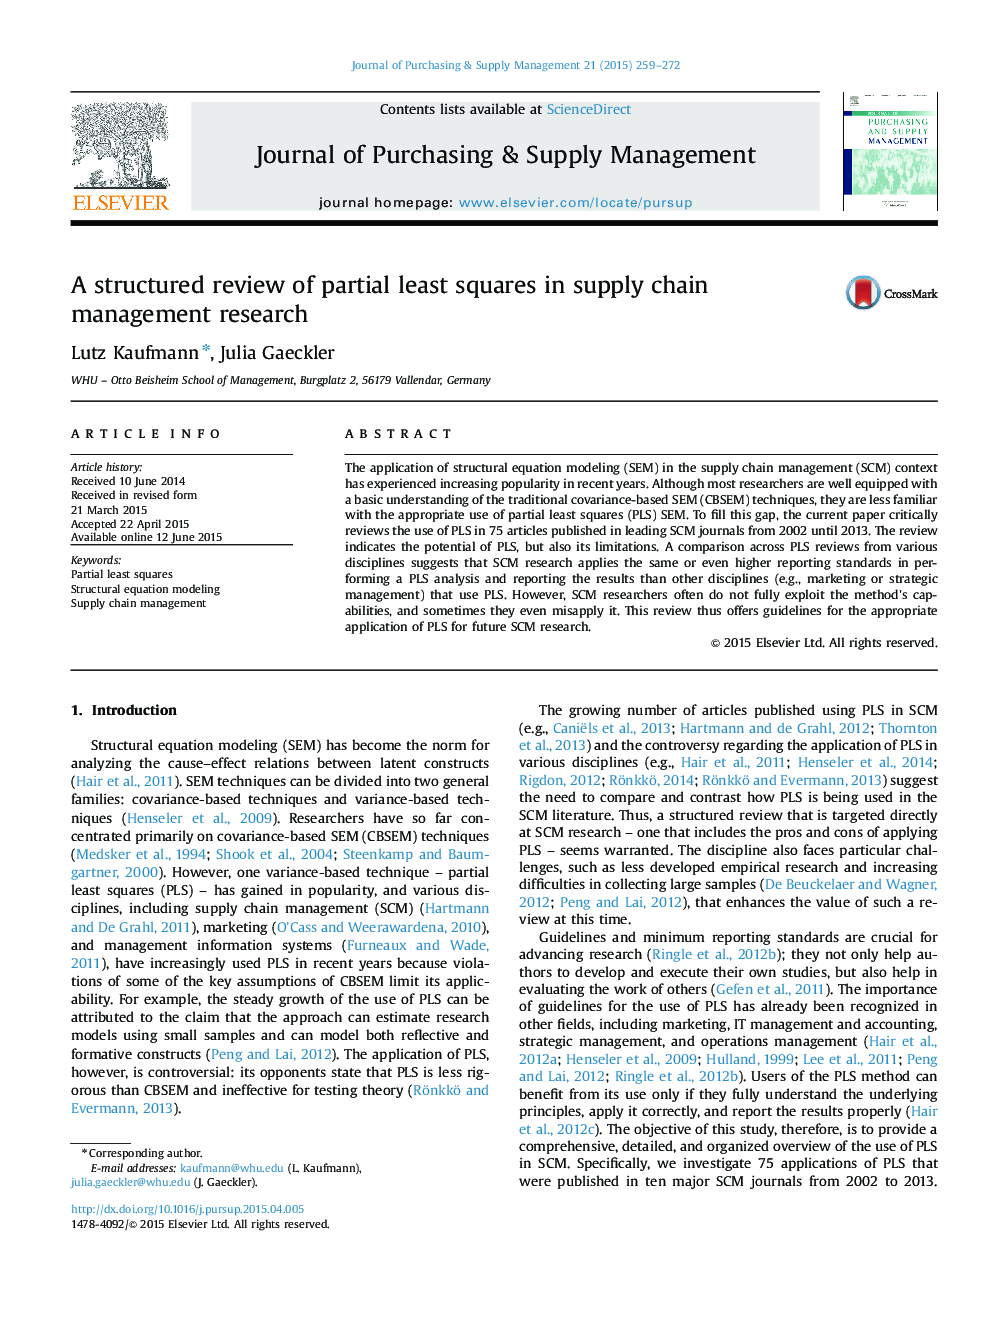 A structured review of partial least squares in supply chain management research